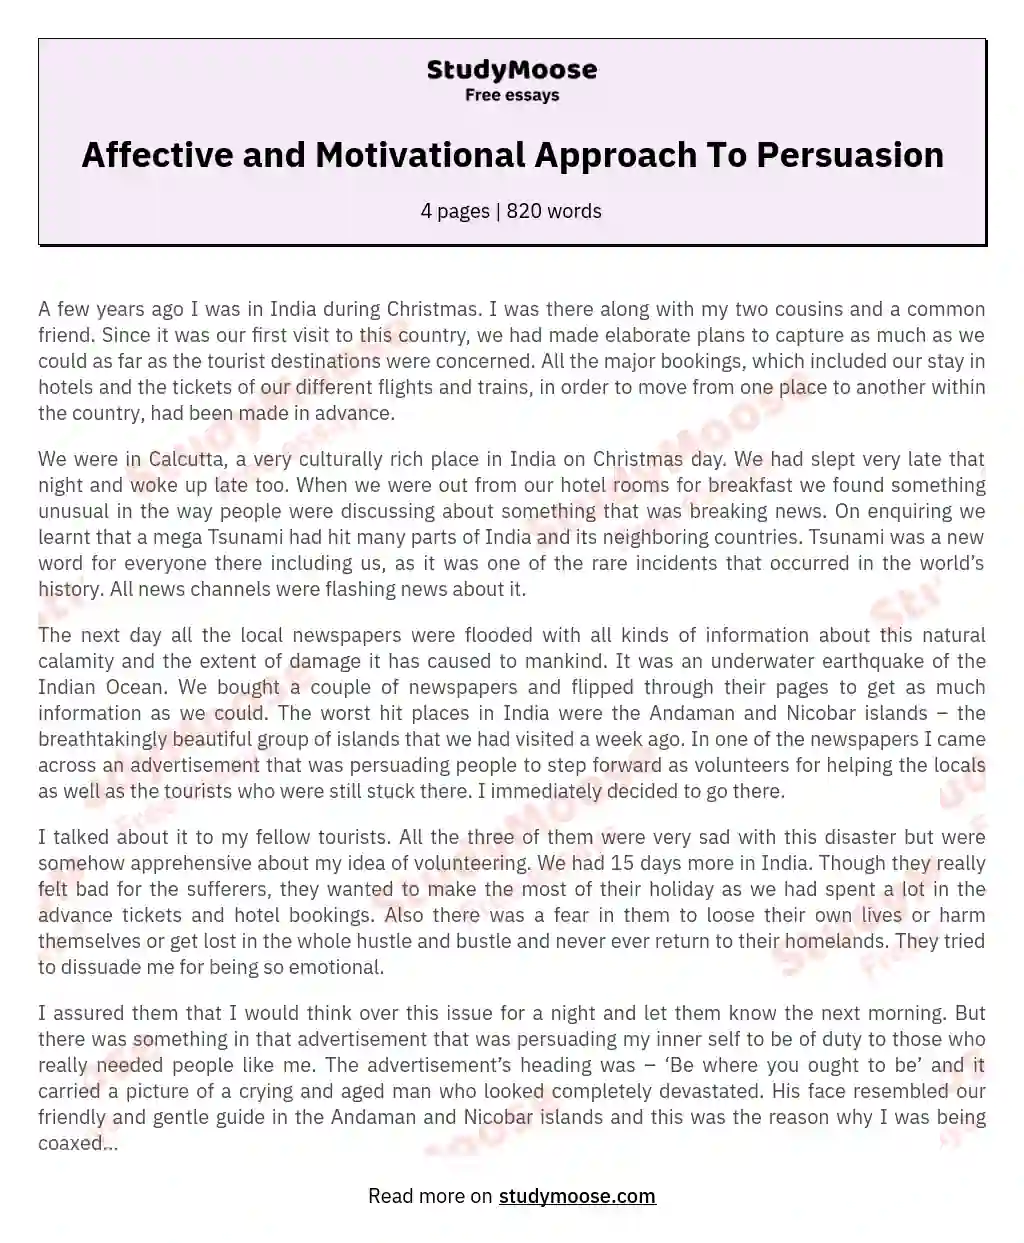 Affective and Motivational Approach To Persuasion